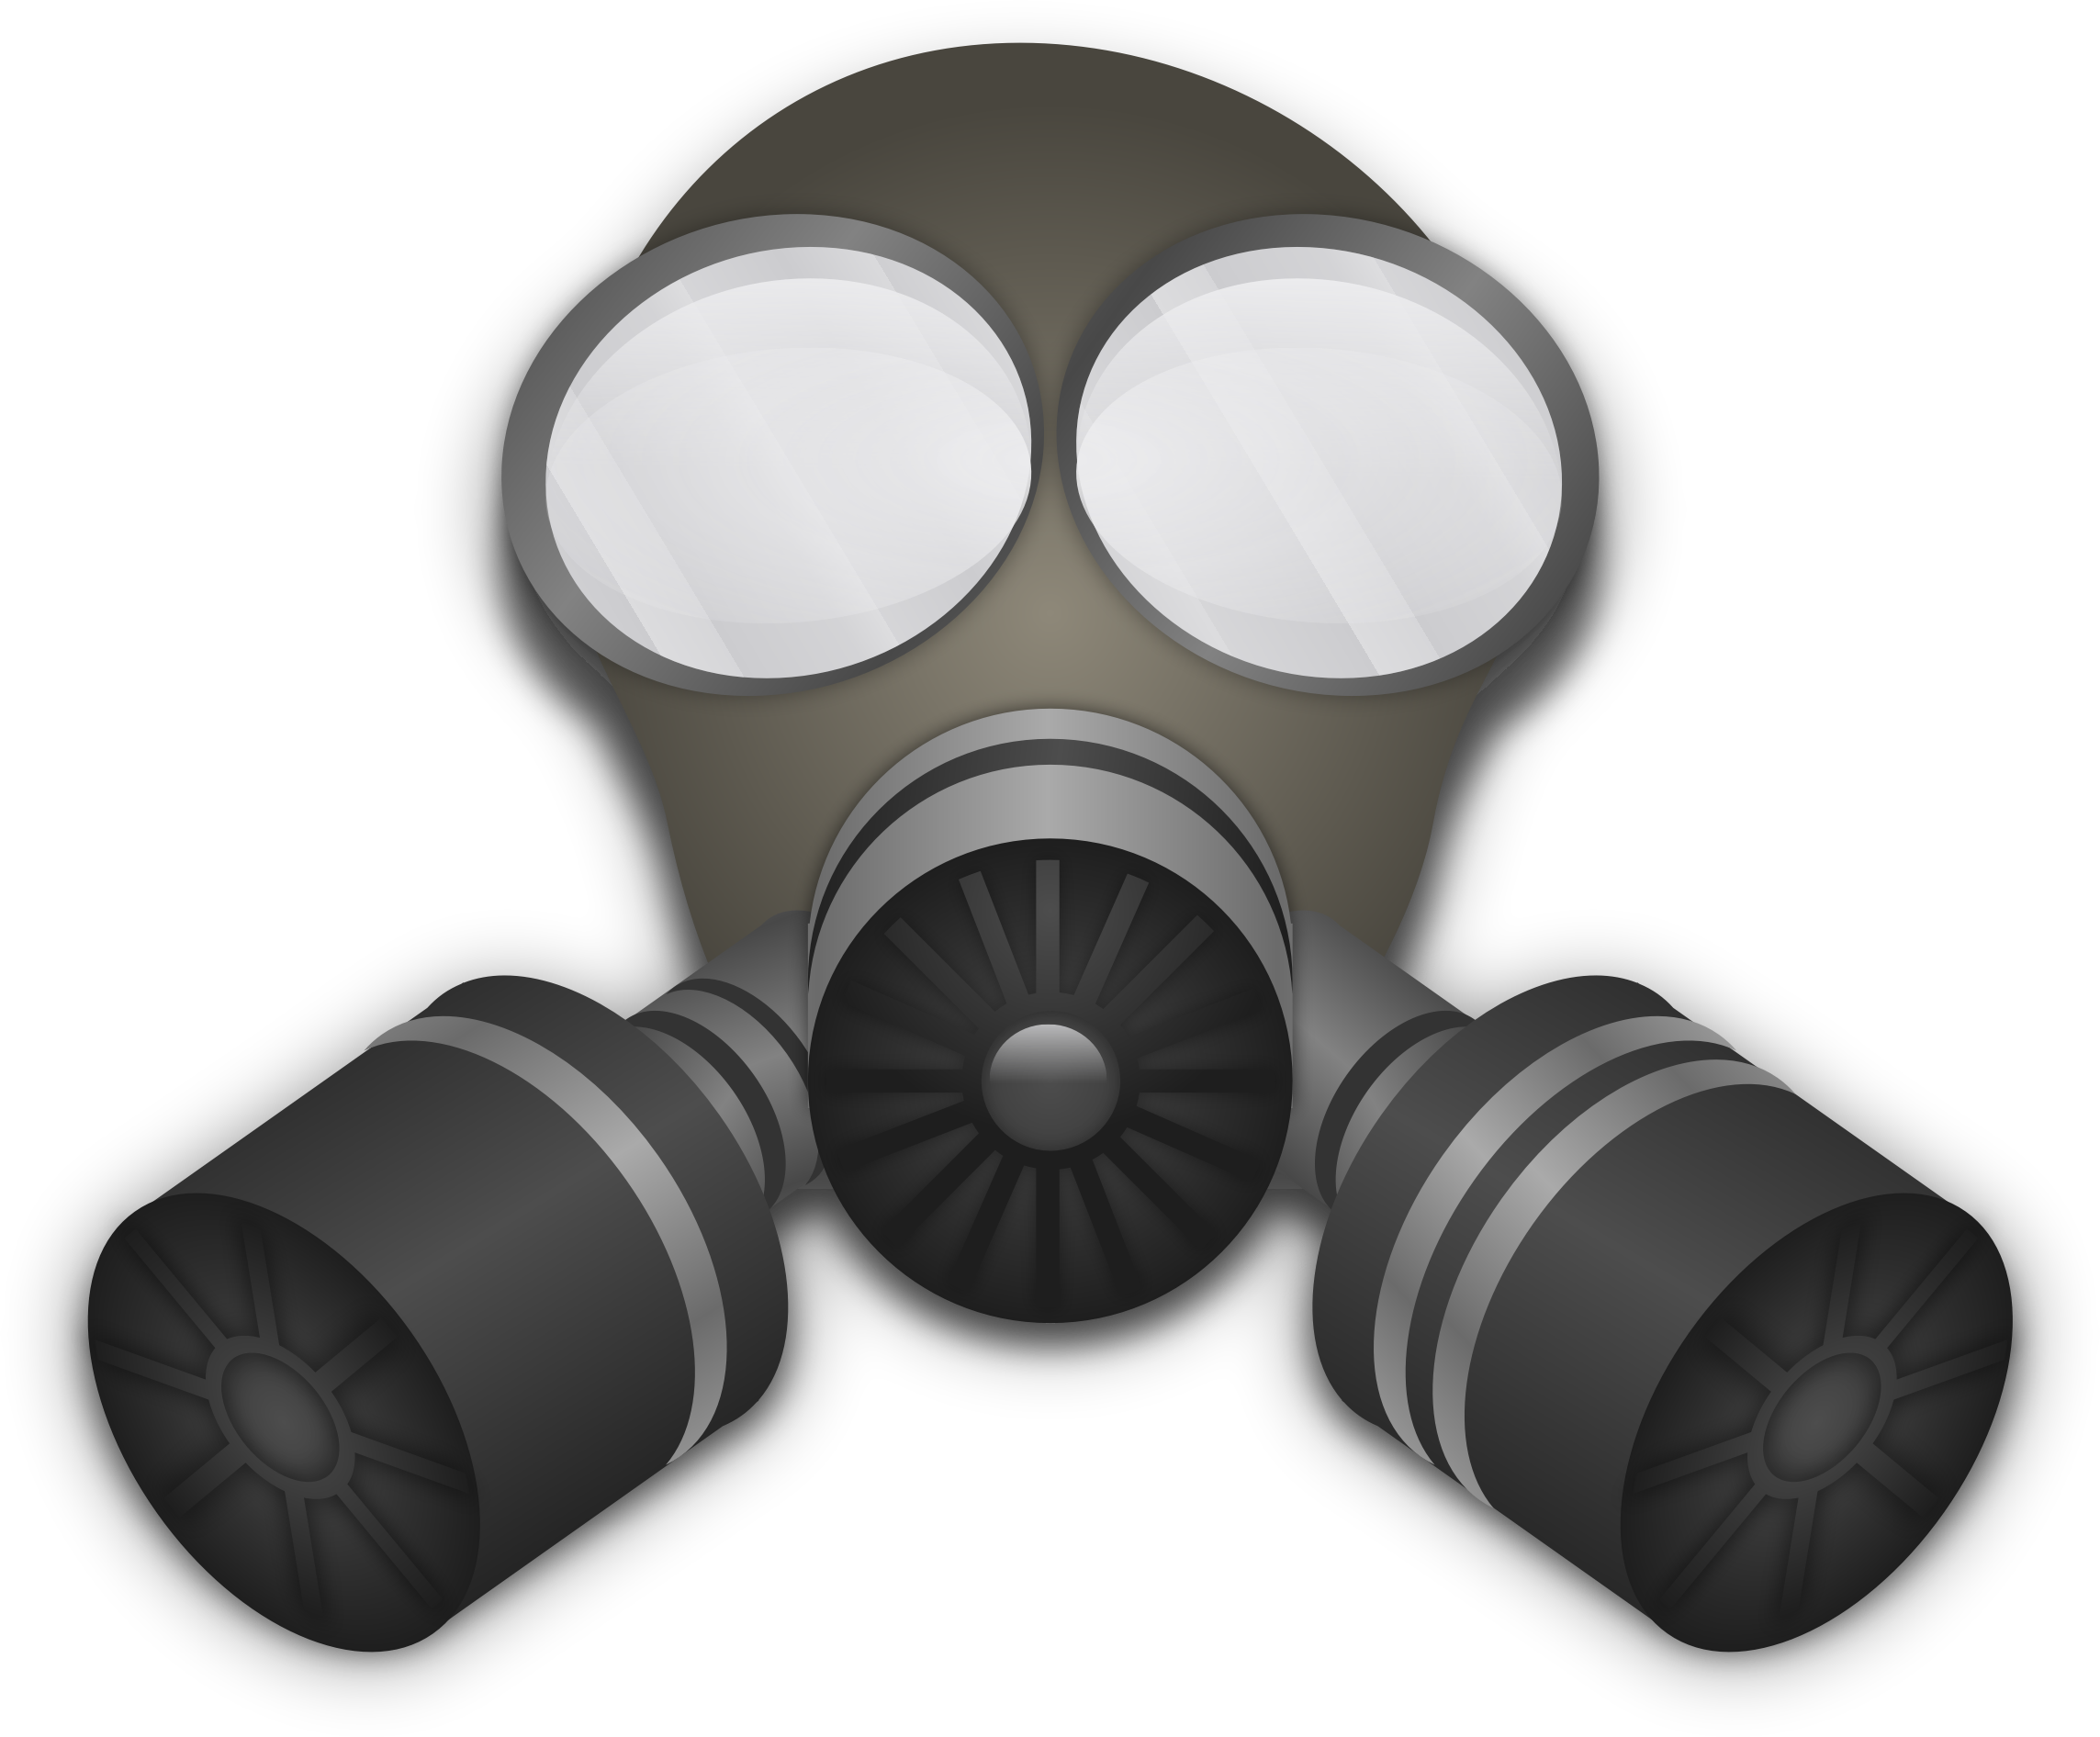 Mask Vector Gas Cool HQ Image Free PNG Image